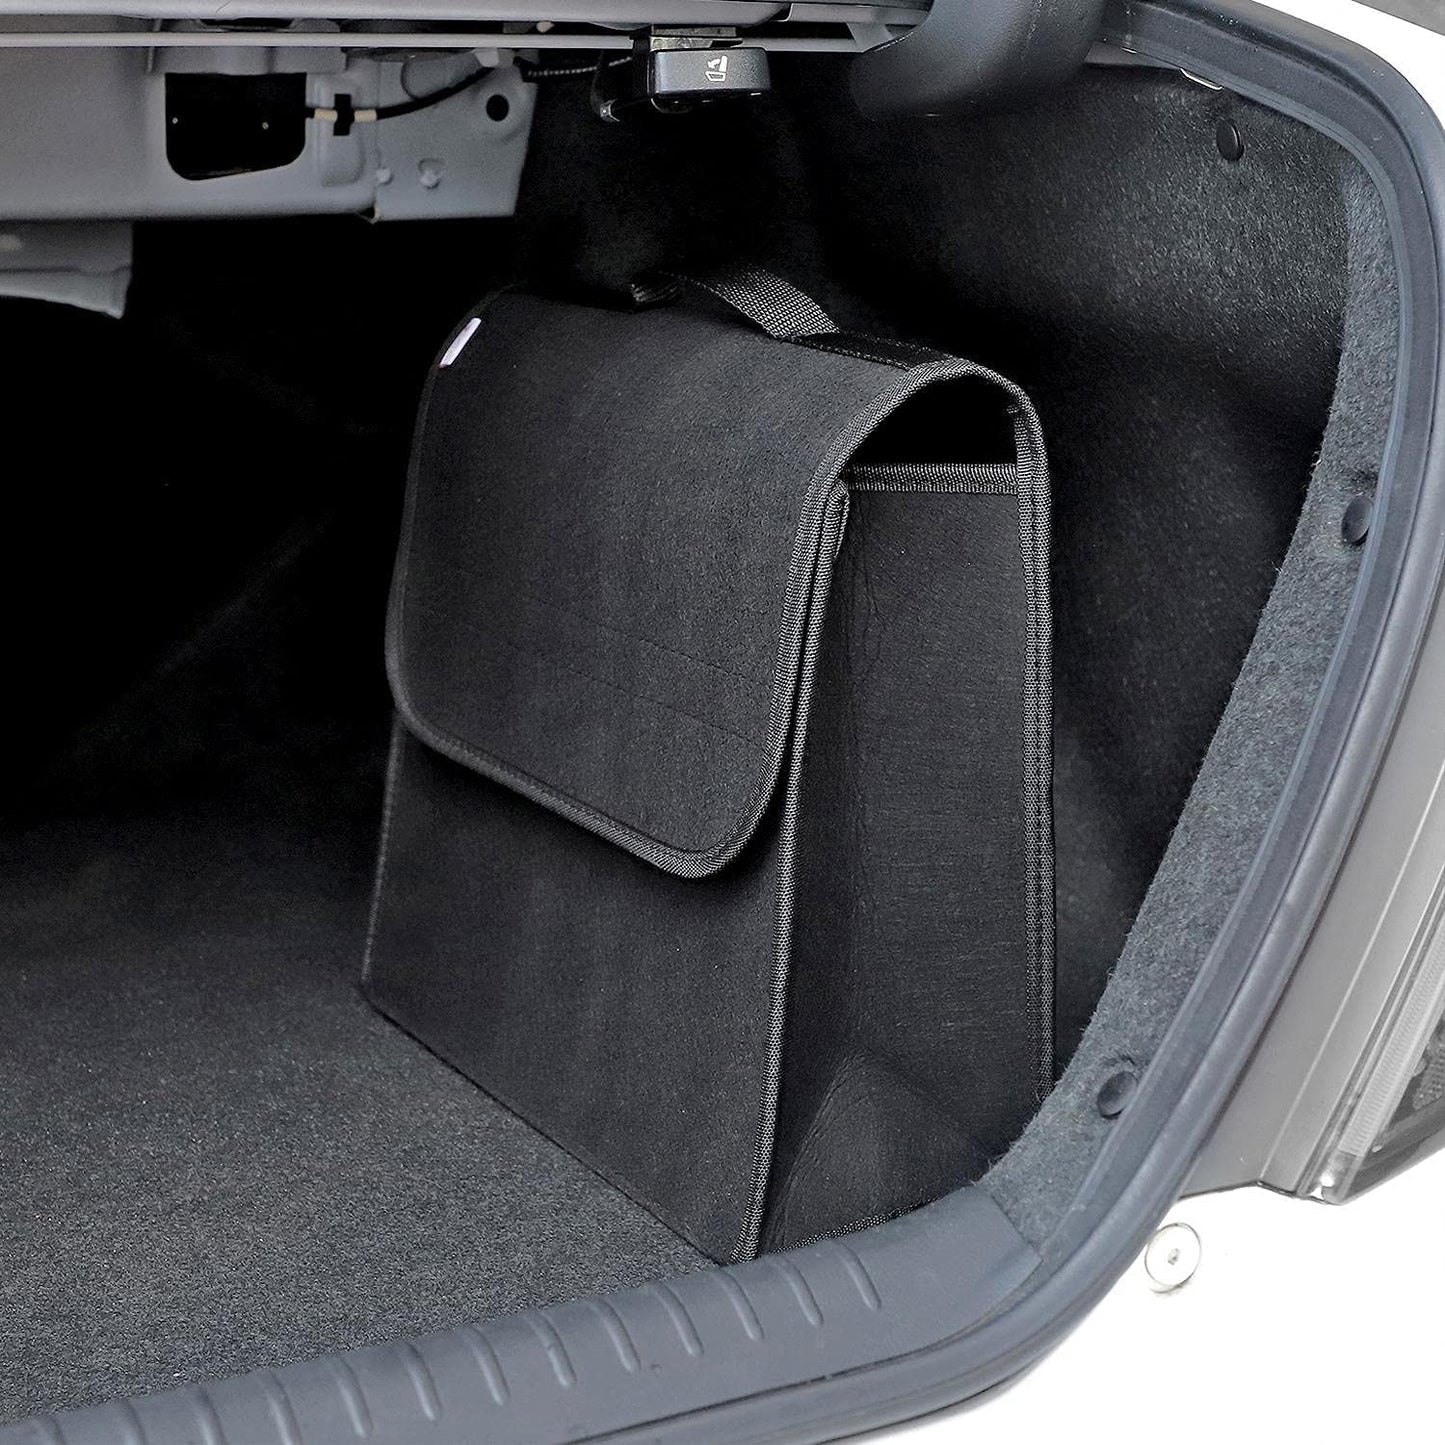 Small Portable Foldable Car Trunk Organizer Felt Cloth Storage Box Case Auto Interior Stowing Tidying Container Bags - Black